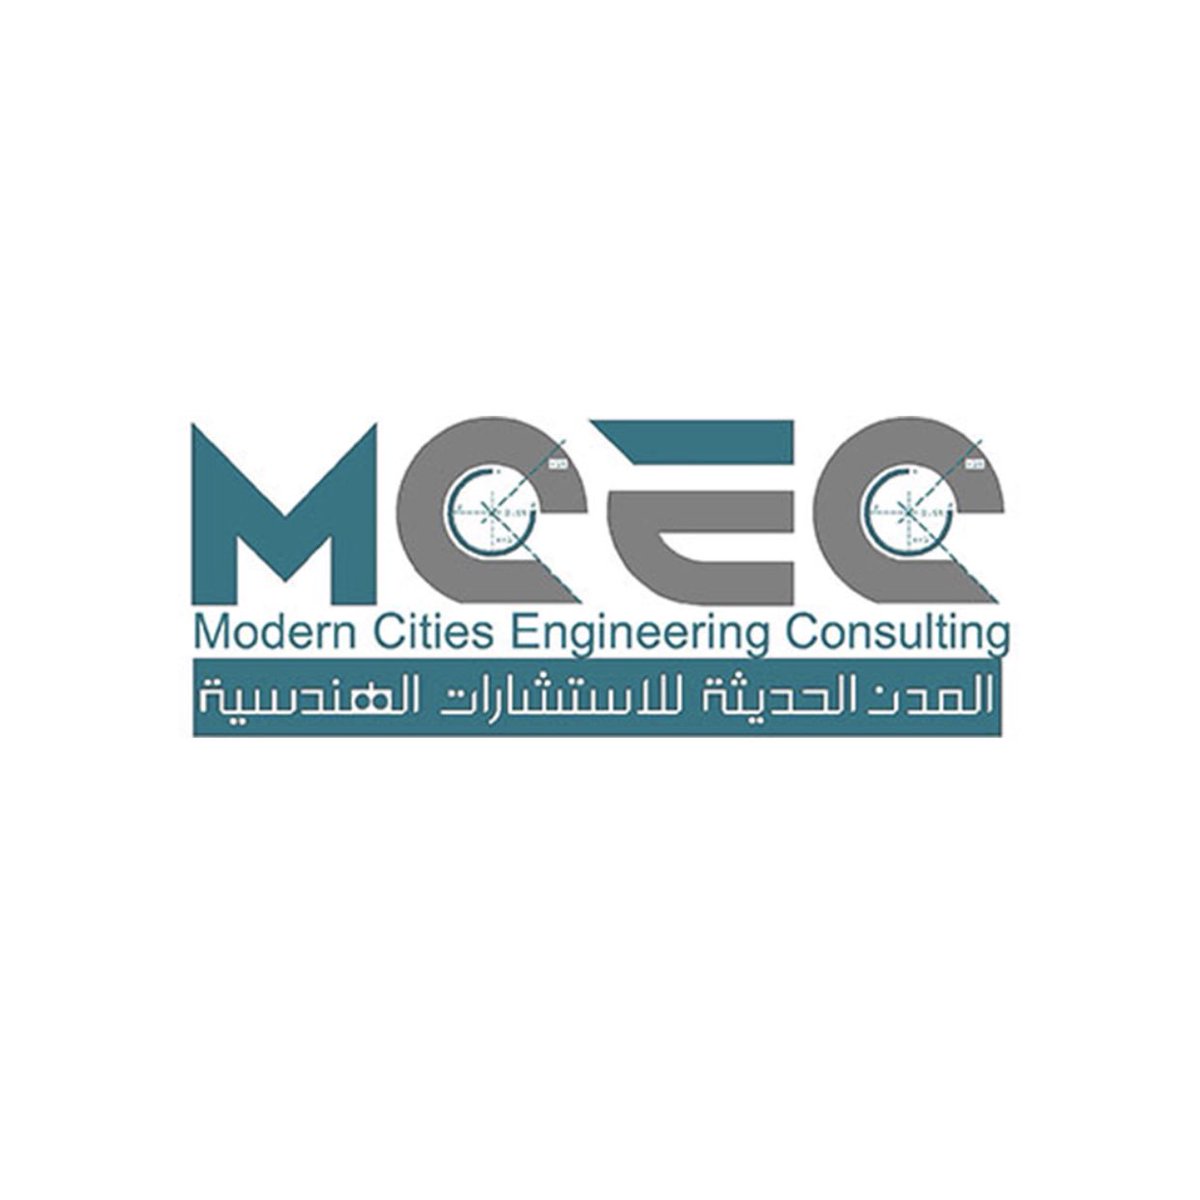 Meeco Consulting